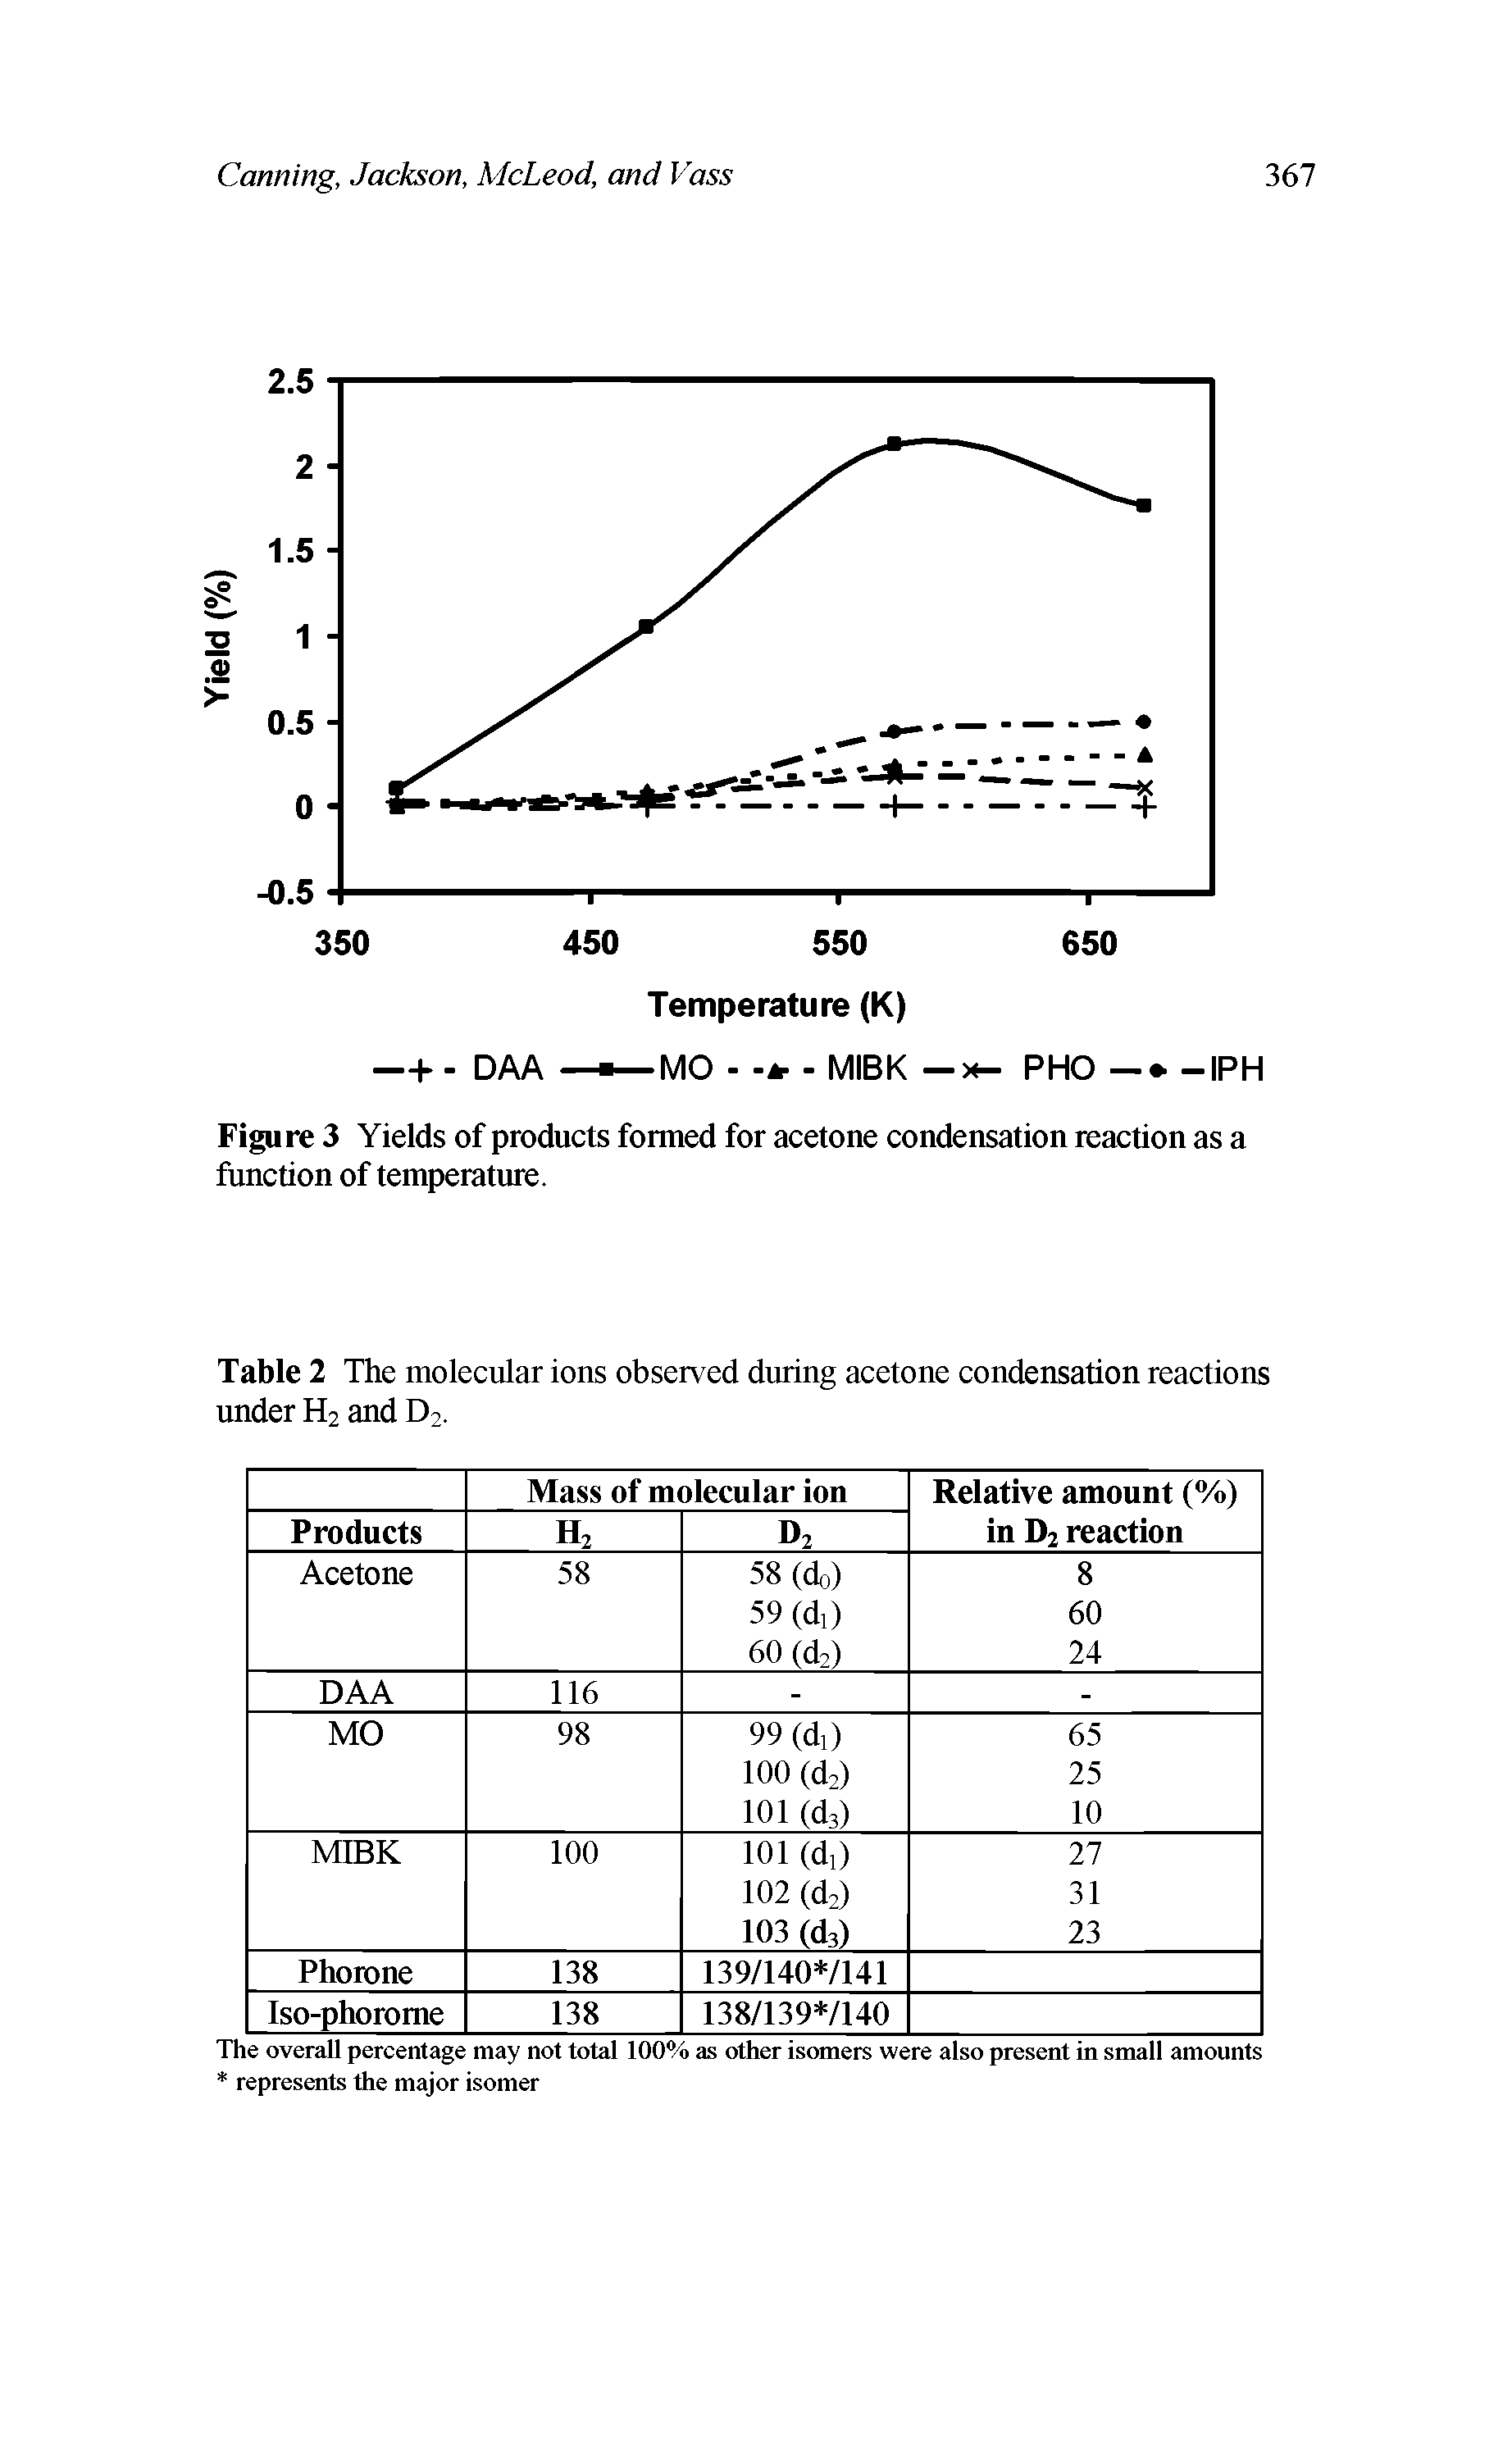 Table 2 The molecular ions observed during acetone condensation reactions under H2 and D2.